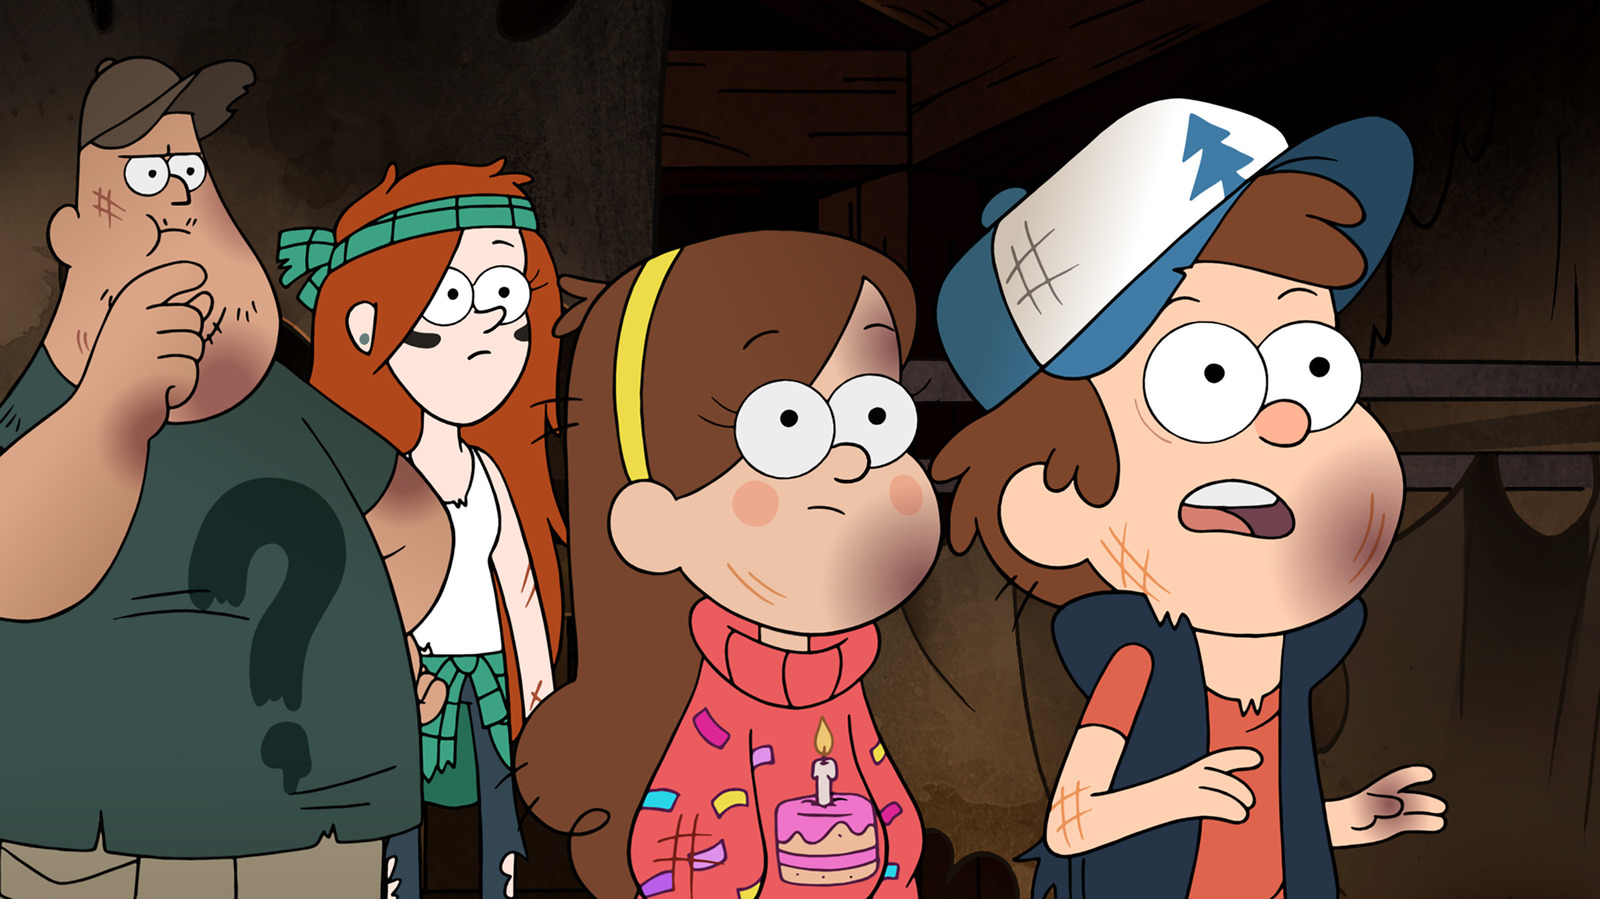 https://www.slashfilm.com/img/gallery/killing-a-main-character-in-gravity-falls-was-never-on-the-table/l-intro-1666814493.jpg